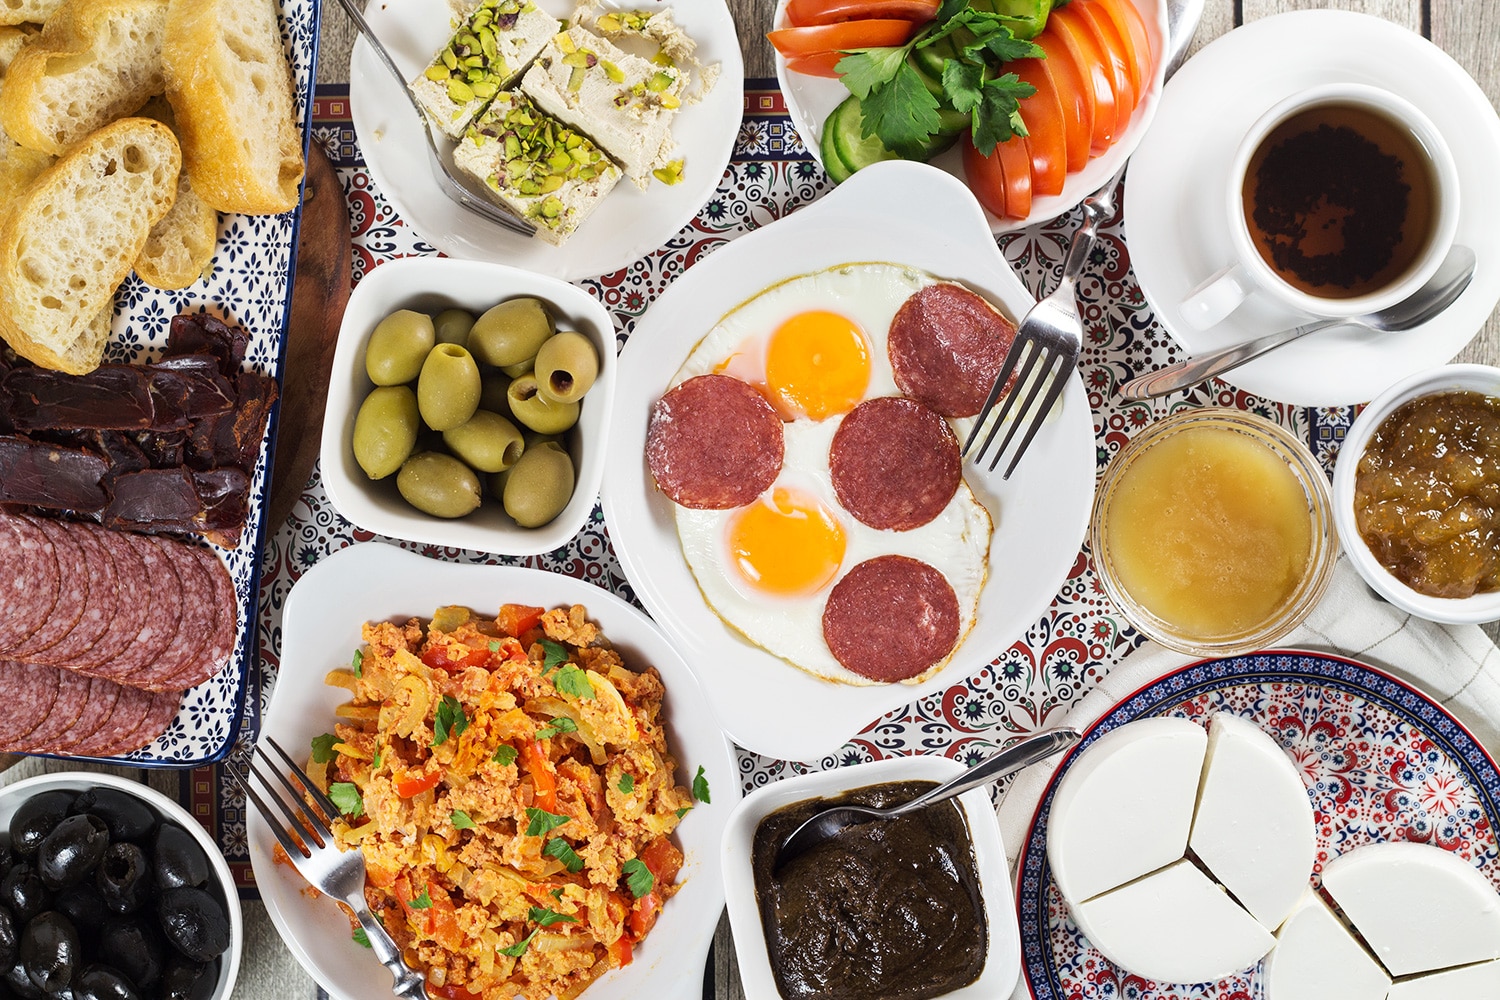 A look at the generous Turkish breakfast which features fresh bread, pastries, cold cuts, eggs, spreads, jams, cheese, veggies, and more! | cookingtheglobe.com